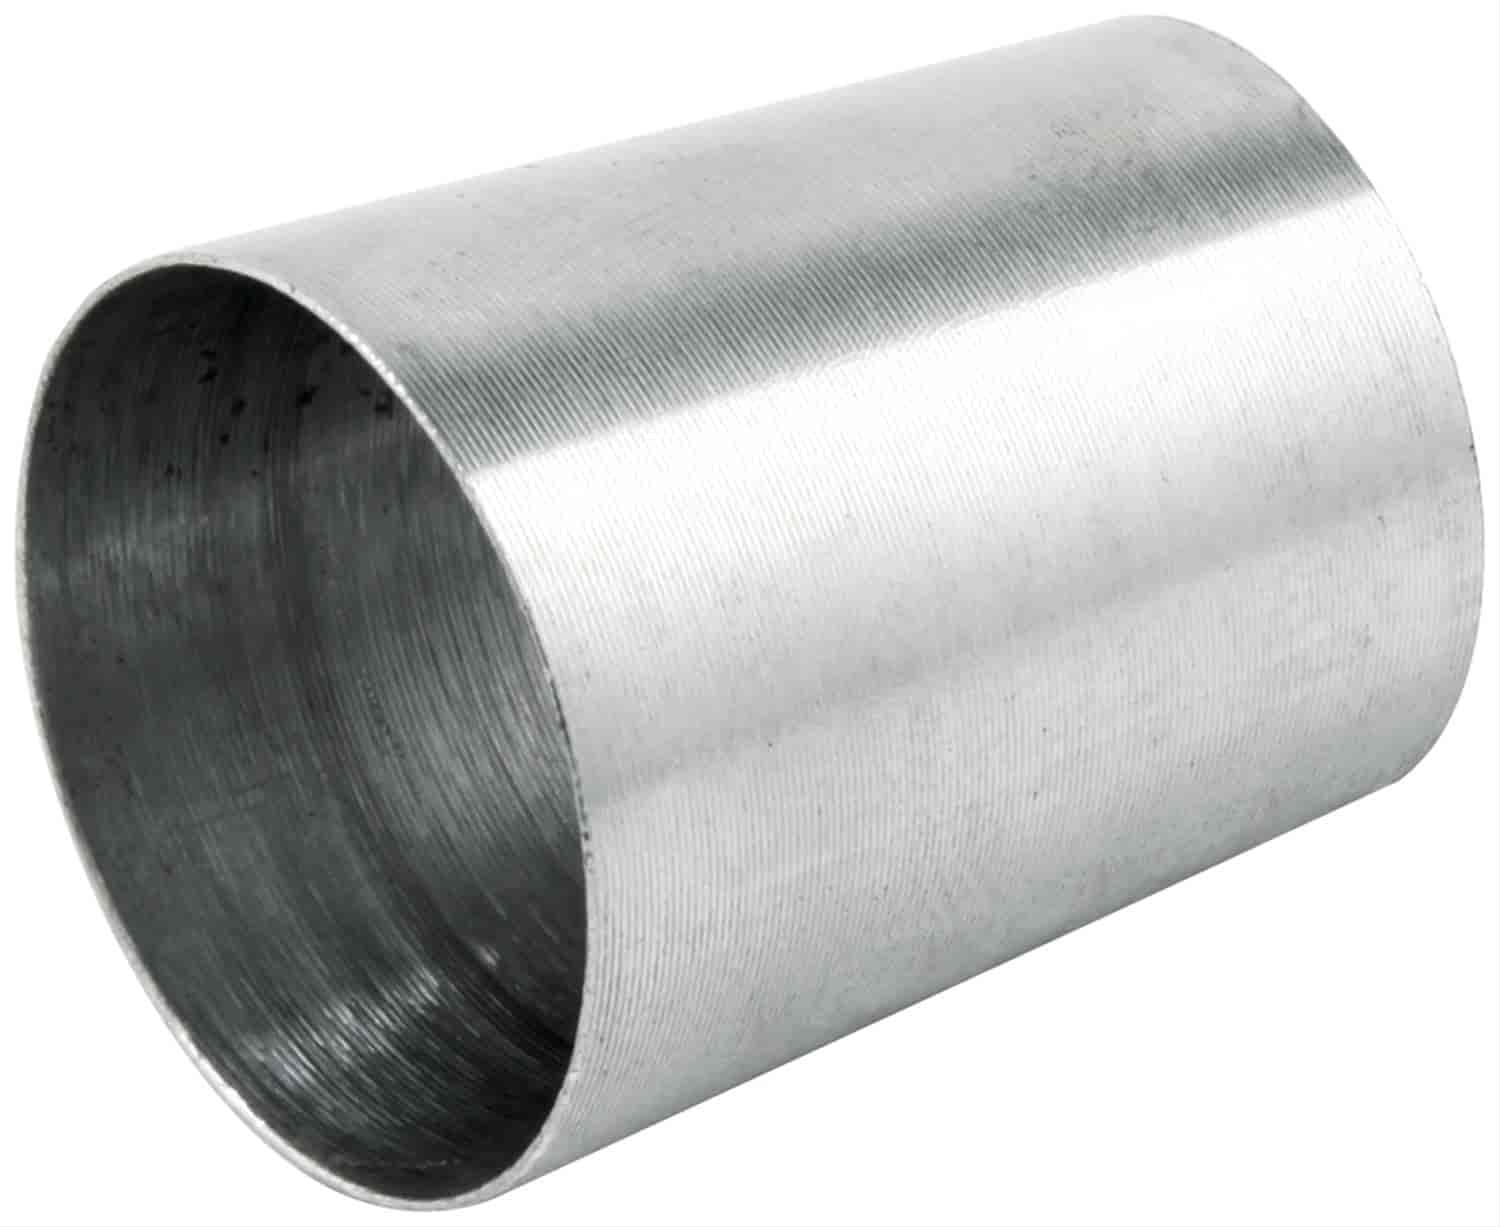 Reducer Bushing Accepts 1-1/2" Taper Per Foot